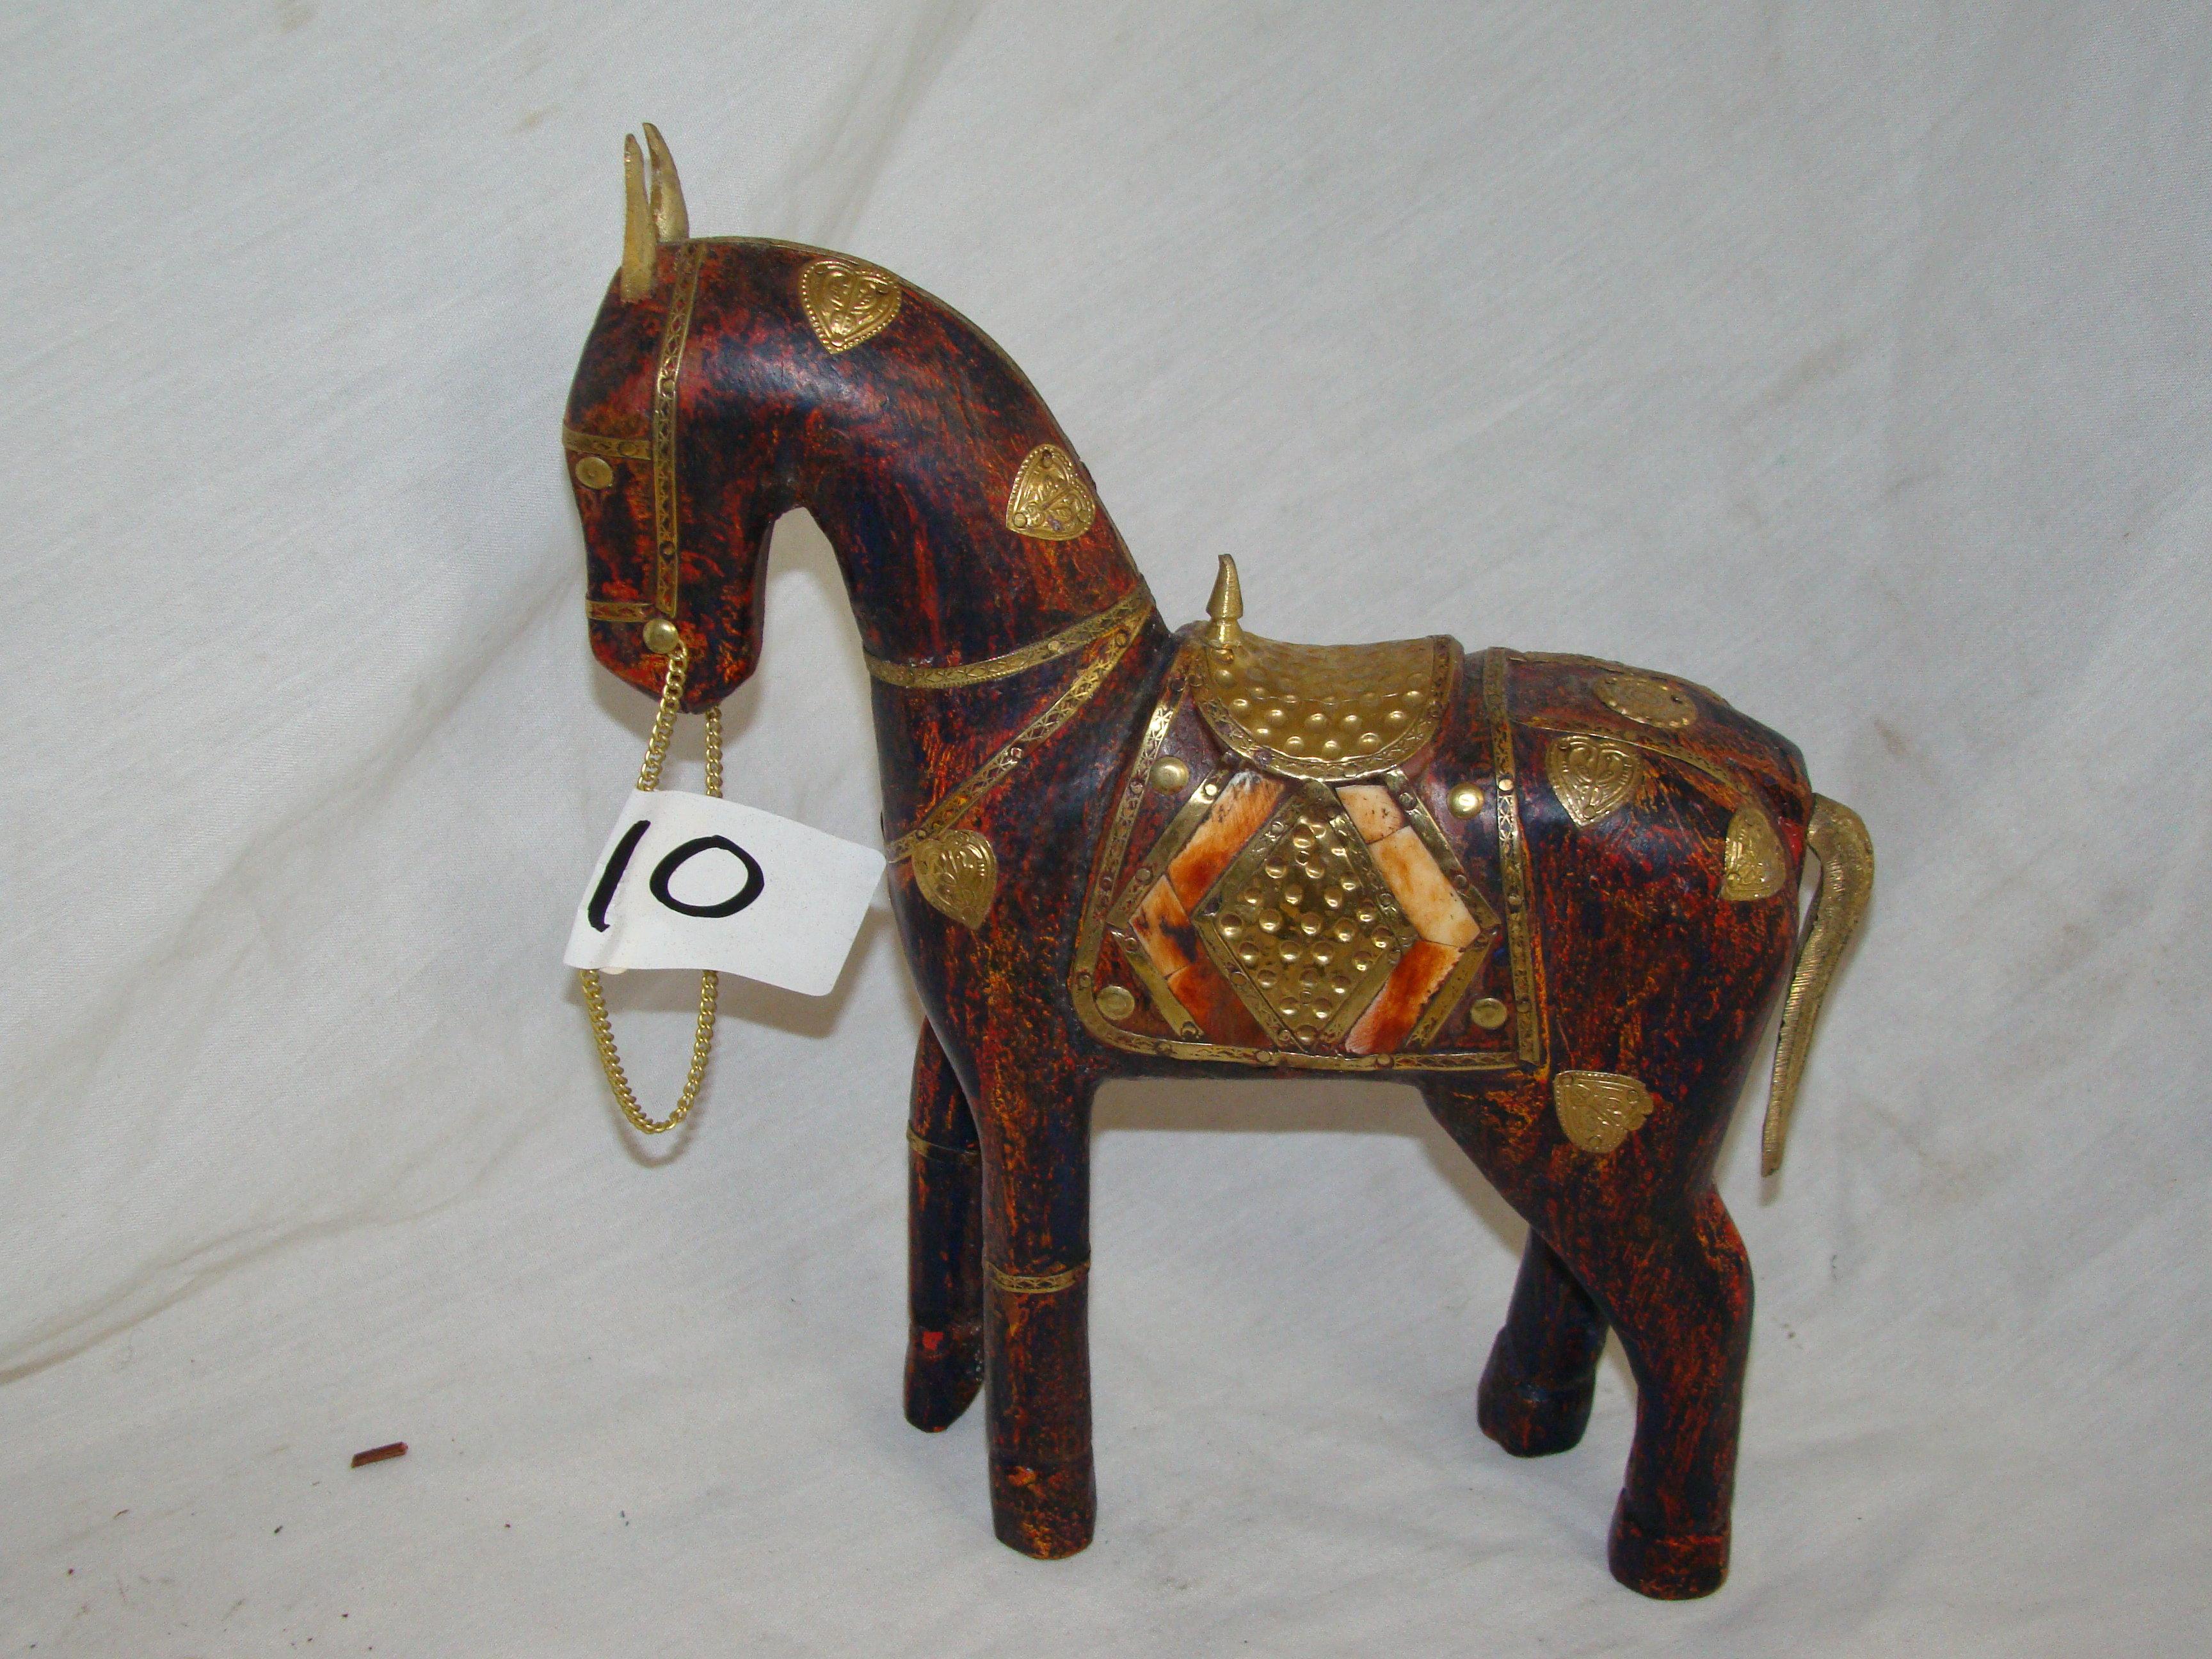 ORIENTAL STYLE HORSE FIGURINE, BRASS AND STONE DECORATED. APPEARS LIKE WOOD